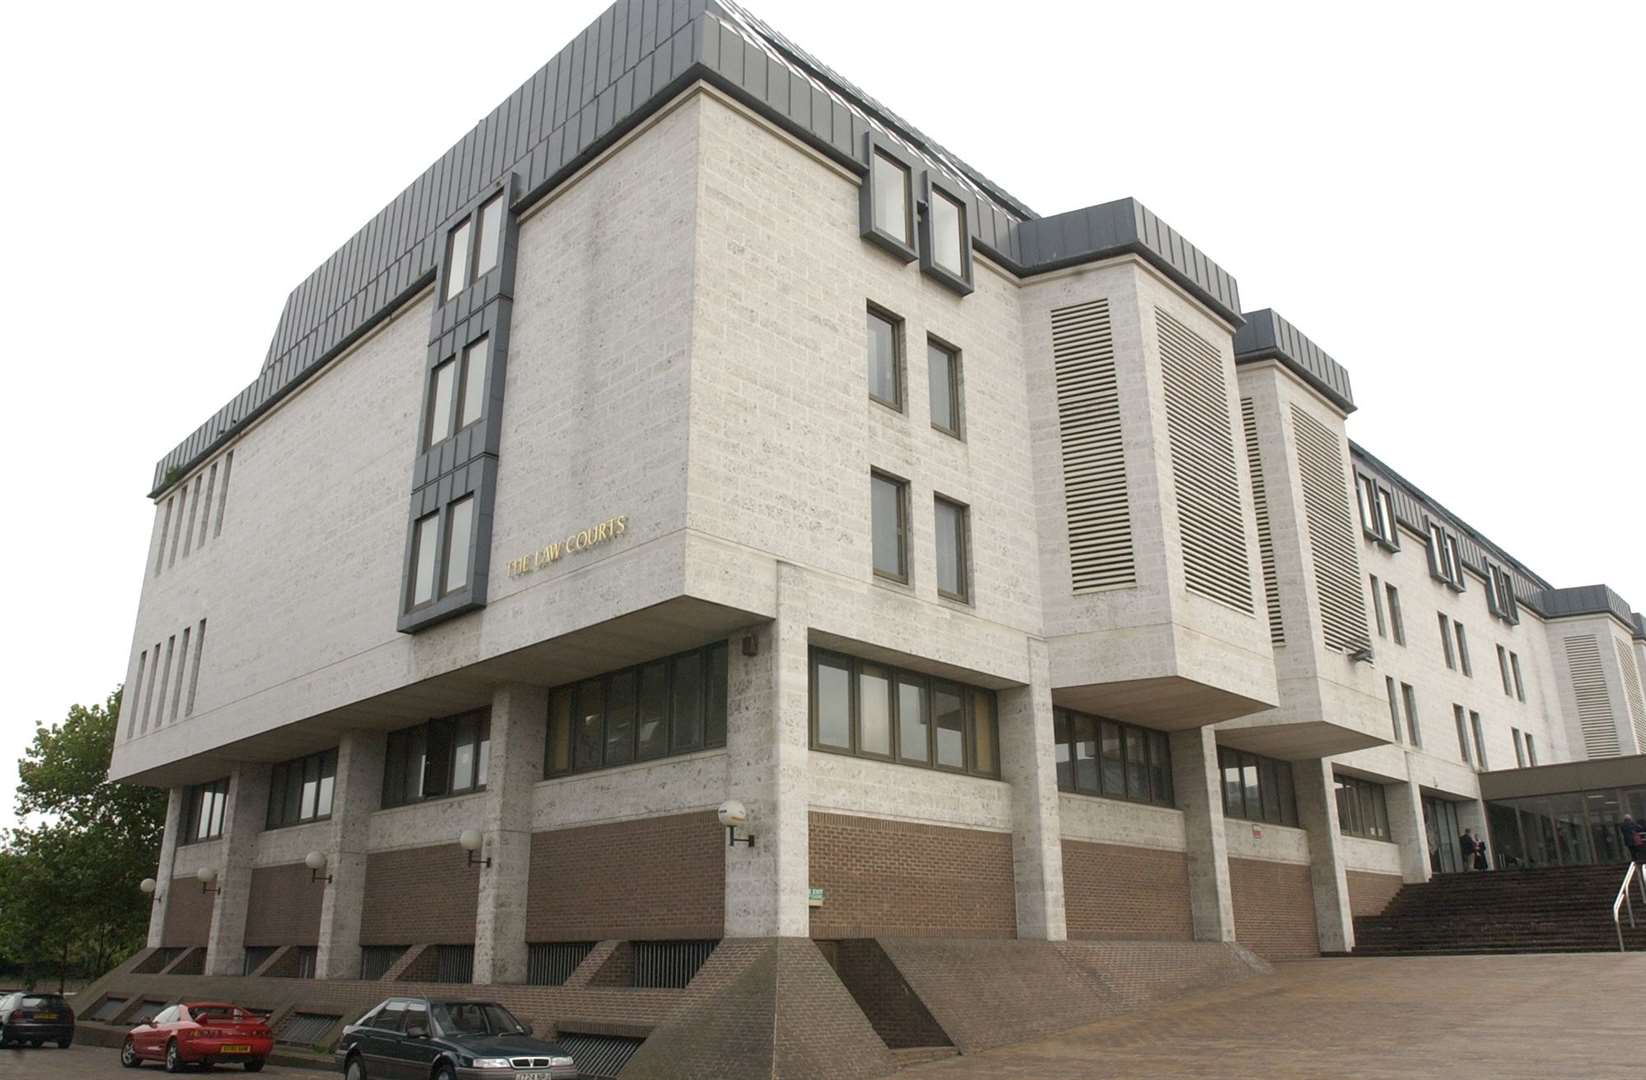 He appeared at Maidstone Crown Court